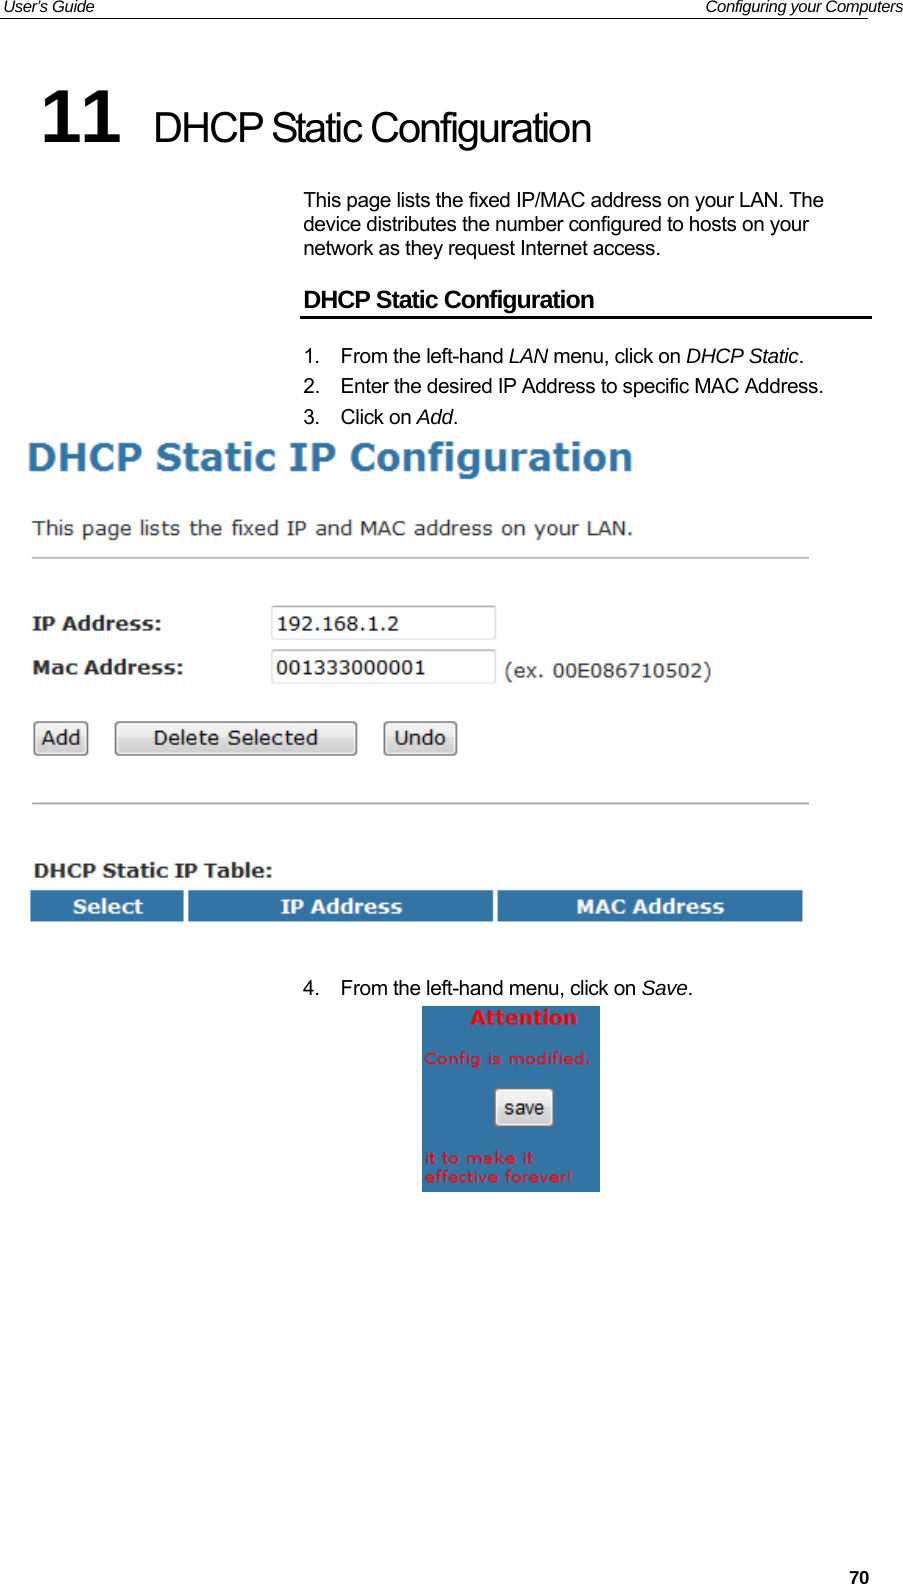 User’s Guide   Configuring your Computers 11  DHCP Static Configuration This page lists the fixed IP/MAC address on your LAN. The device distributes the number configured to hosts on your network as they request Internet access. DHCP Static Configuration 1.  From the left-hand LAN menu, click on DHCP Static. 2.  Enter the desired IP Address to specific MAC Address. 3. Click on Add.   4.  From the left-hand menu, click on Save.            70